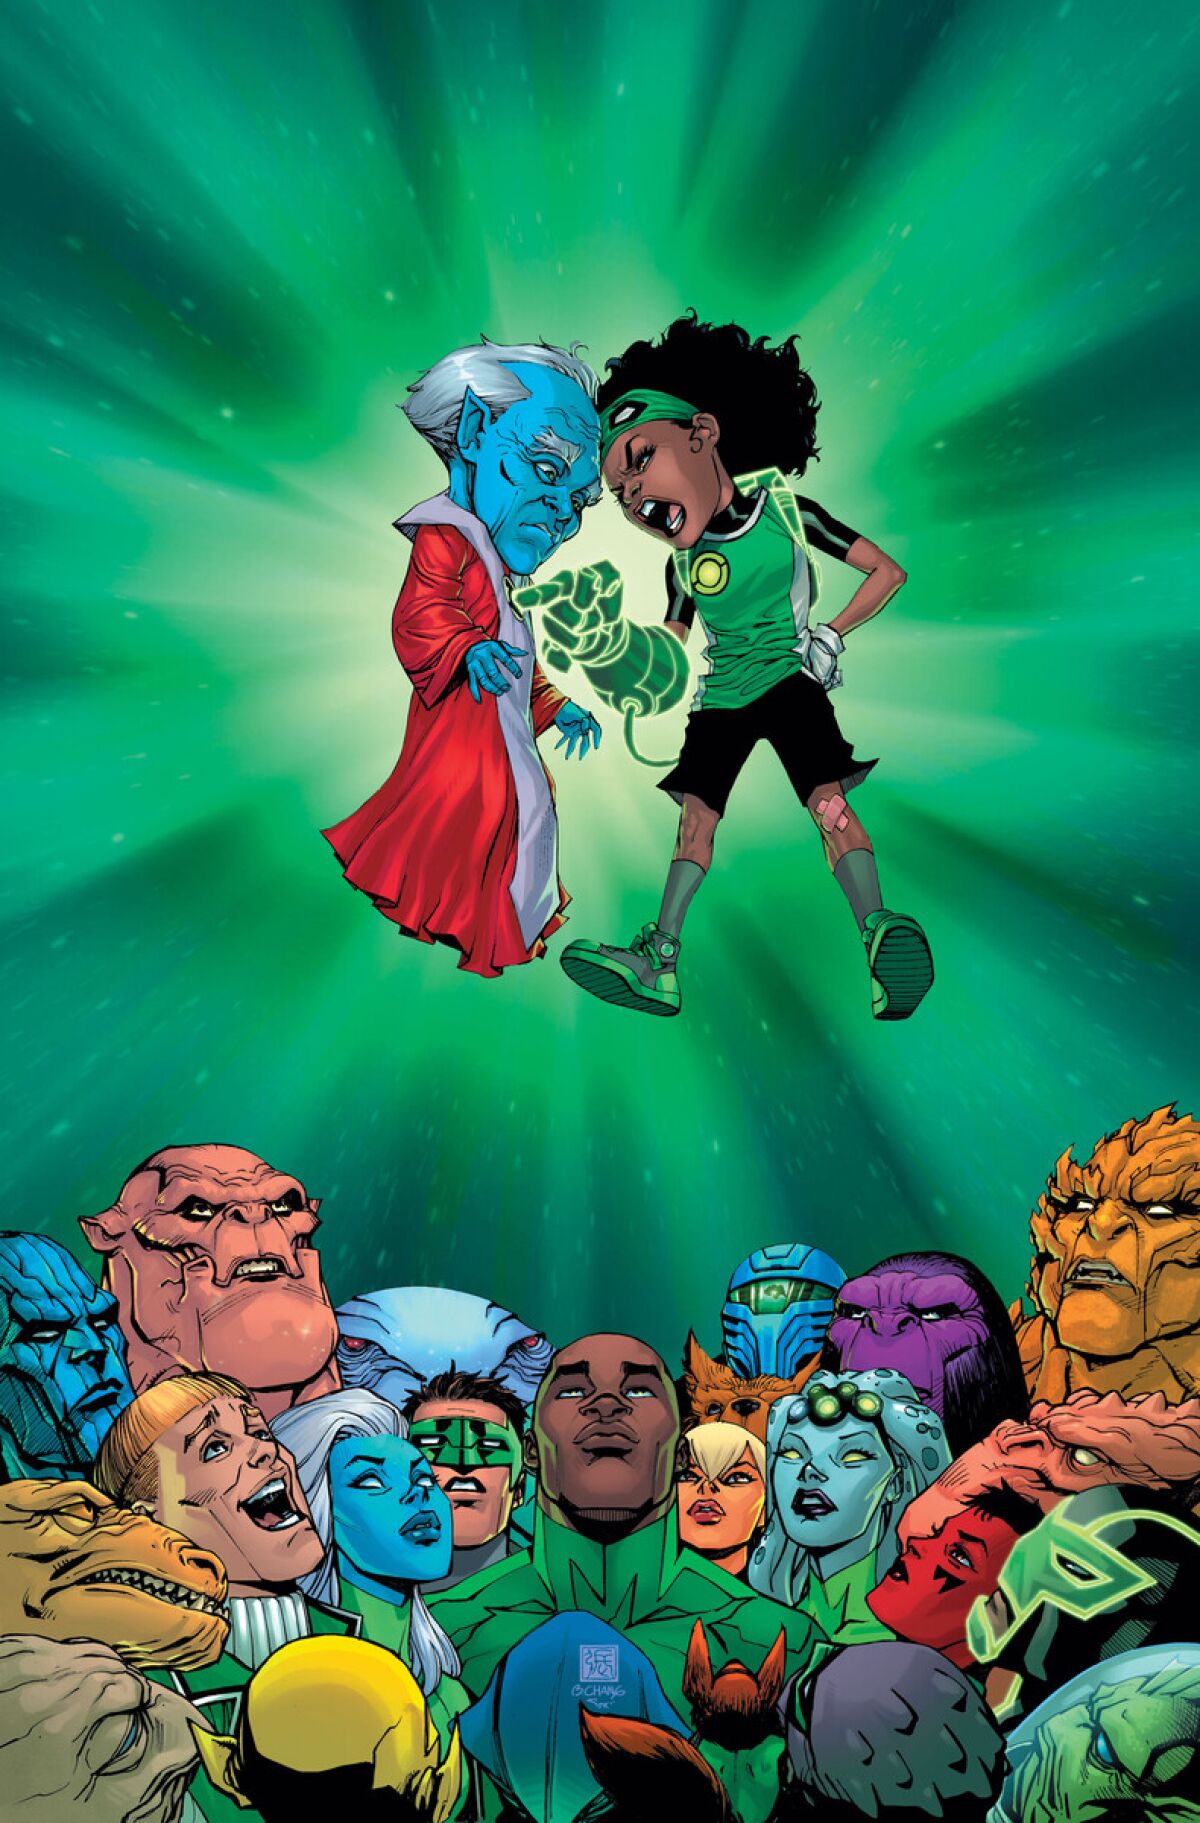 A young woman with a glowing green glove confronts a blue character with white hair.